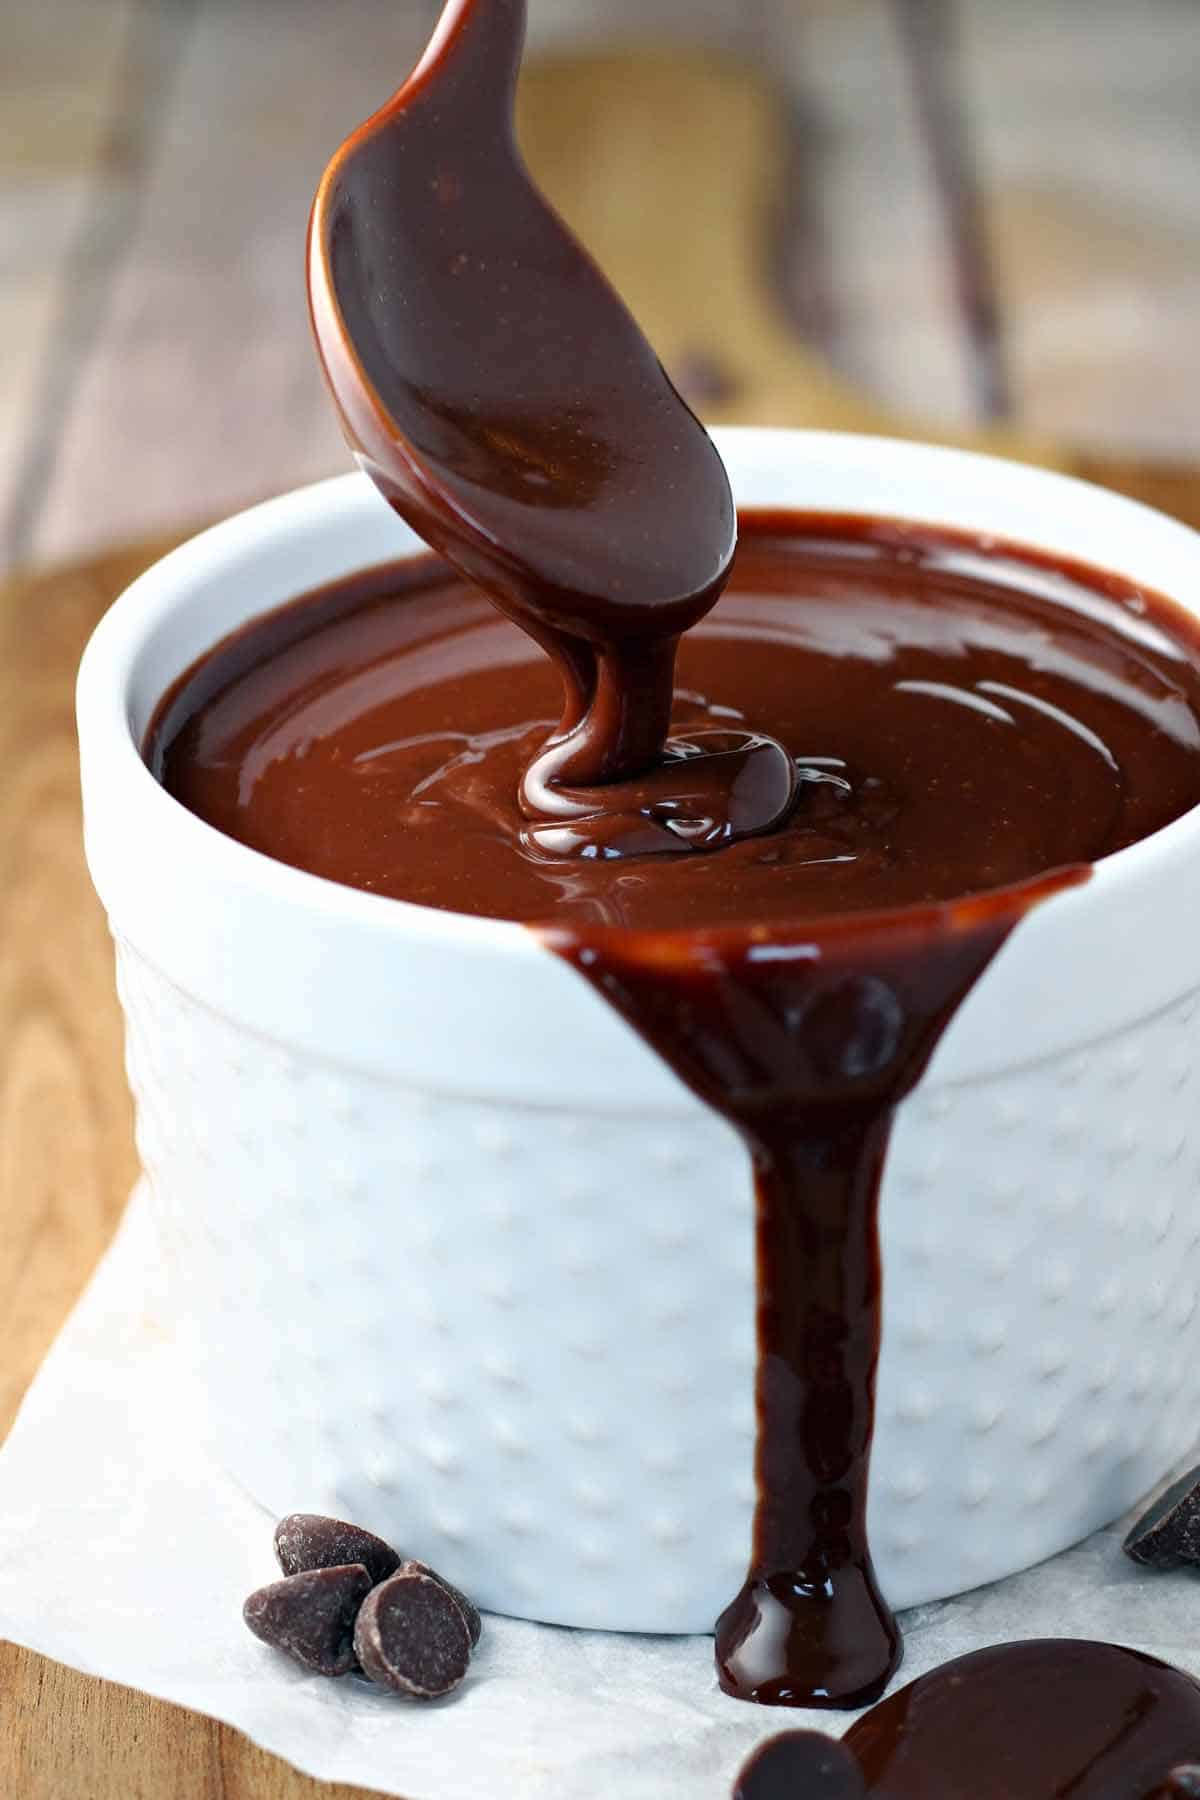 Bowl of melted chocolate with a spoon.